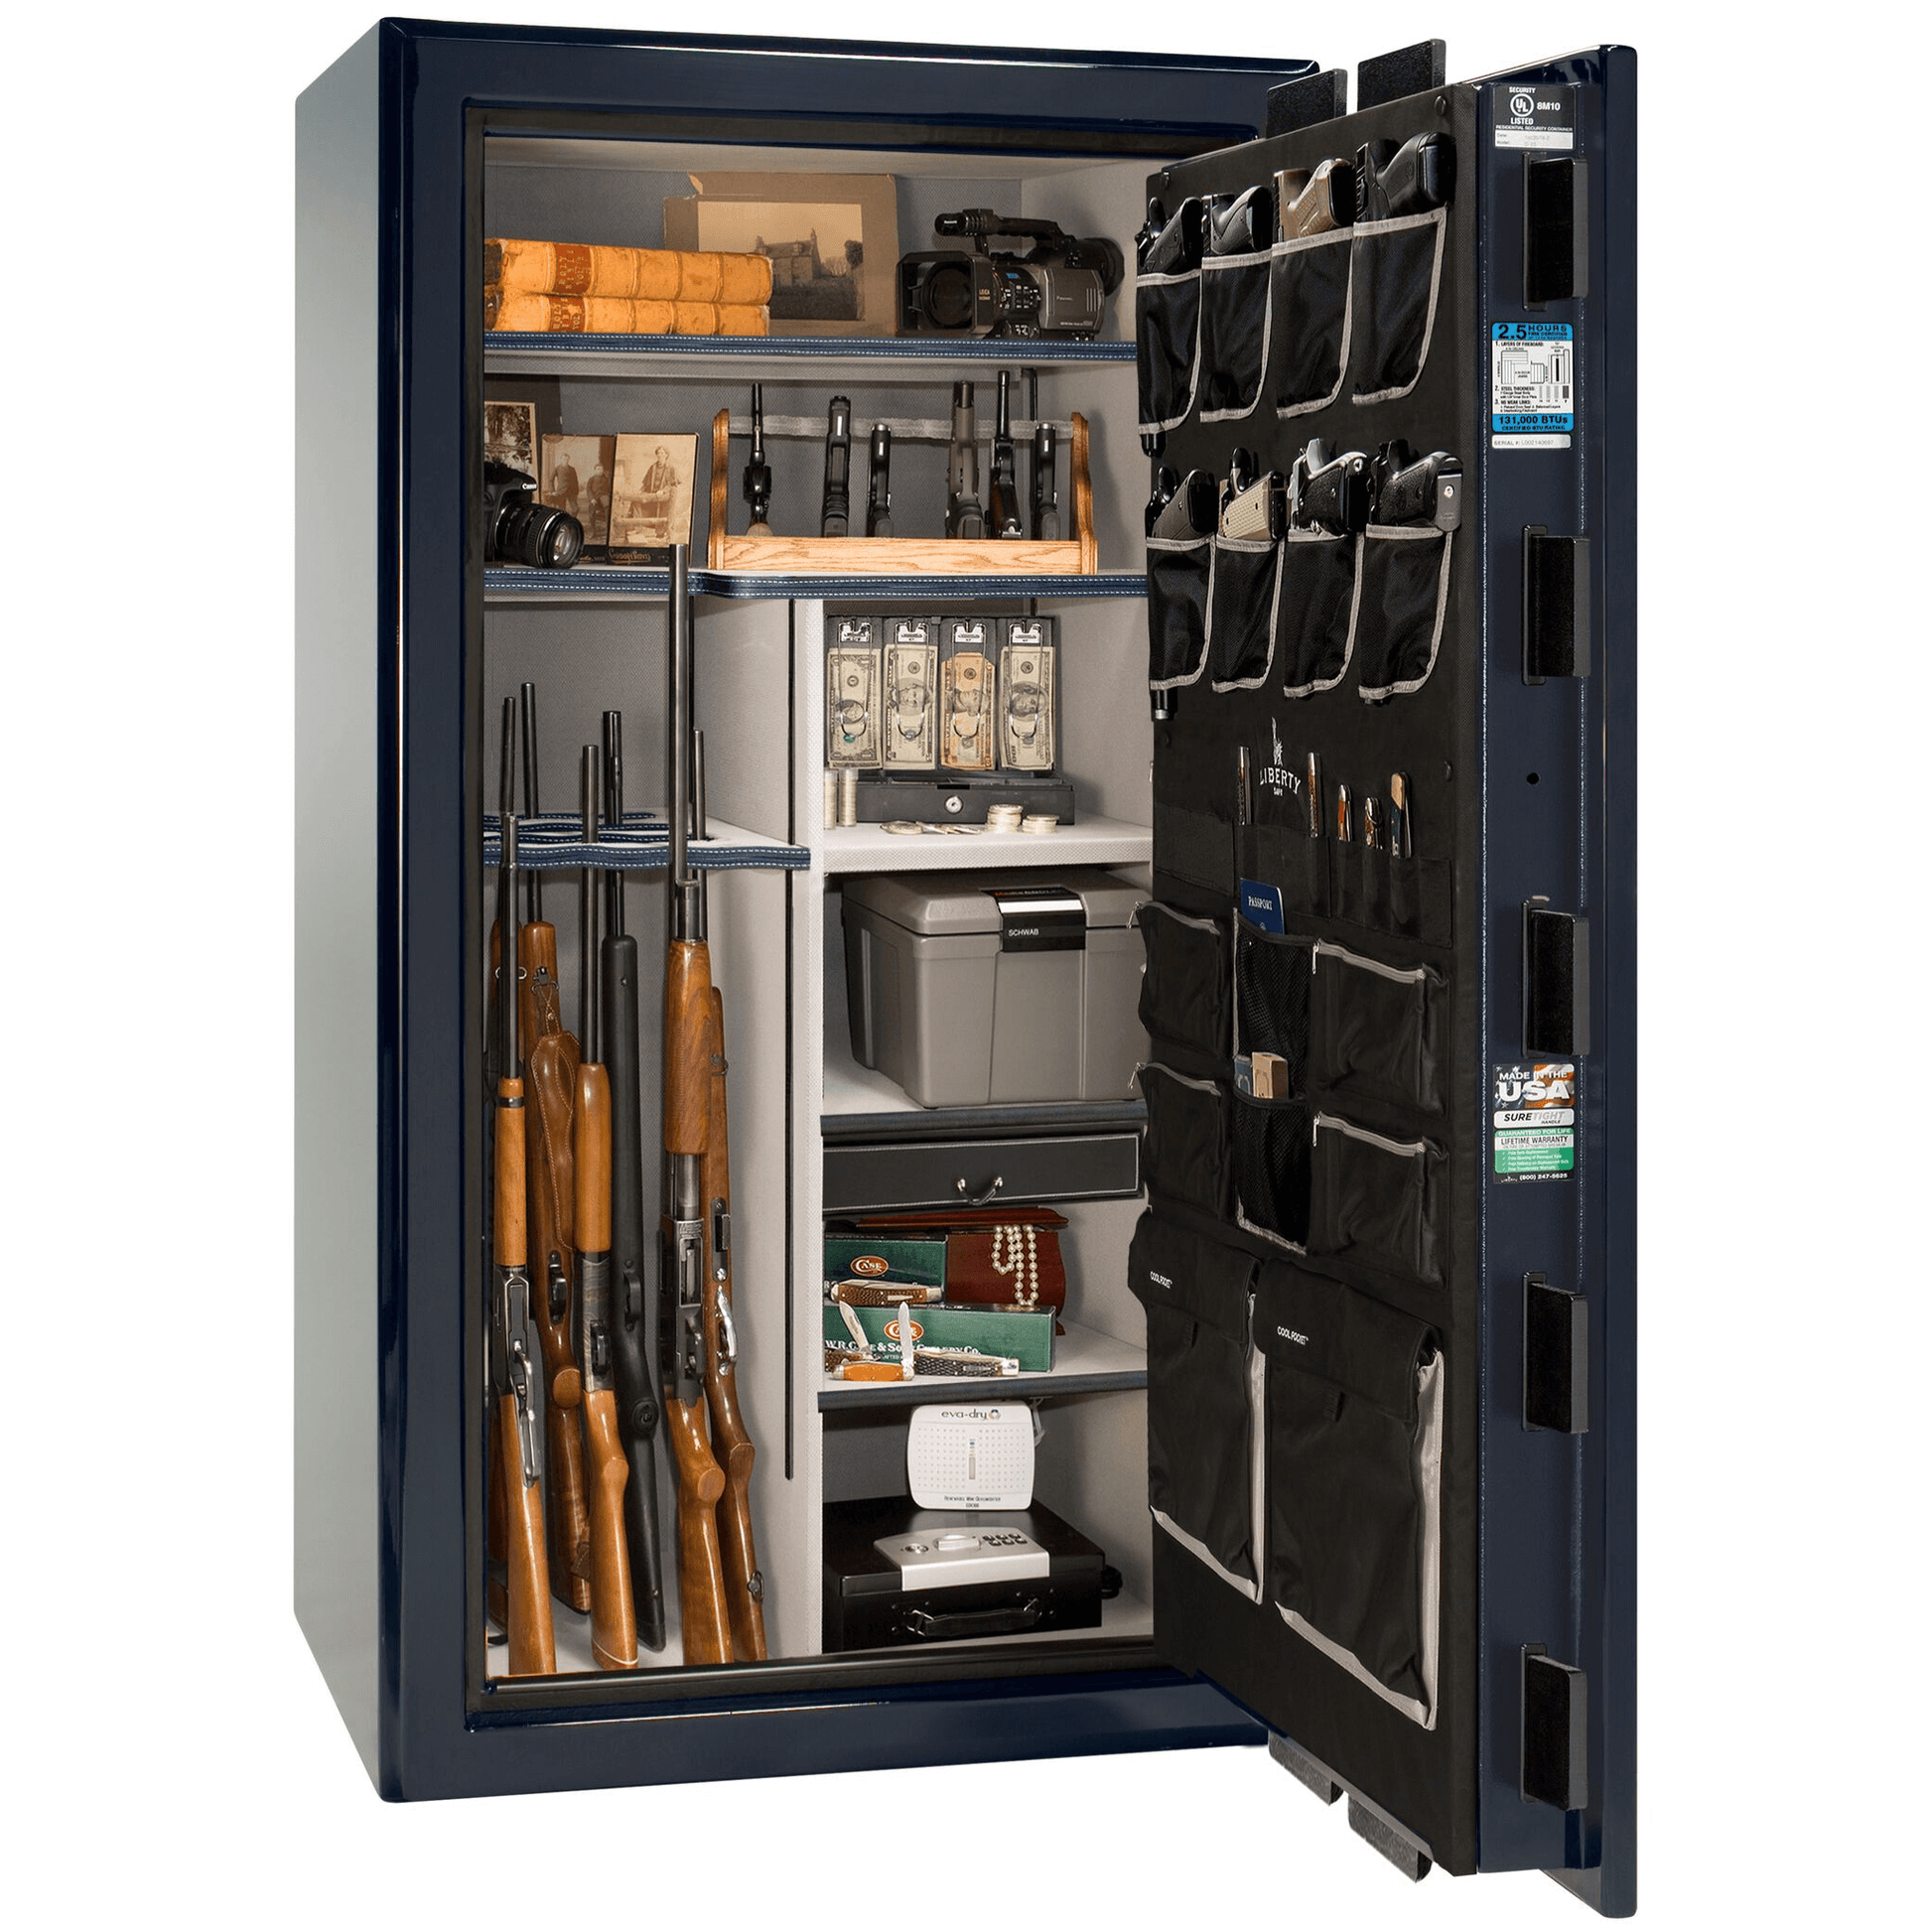 Presidential Series | Level 8 Security | 2.5 Hours Fire Protection | 40 | Dimensions: 66.5"(H) x 36.25"(W) x 32"(D) | Blue Gloss | Chrome Hardware | Mechanical Lock